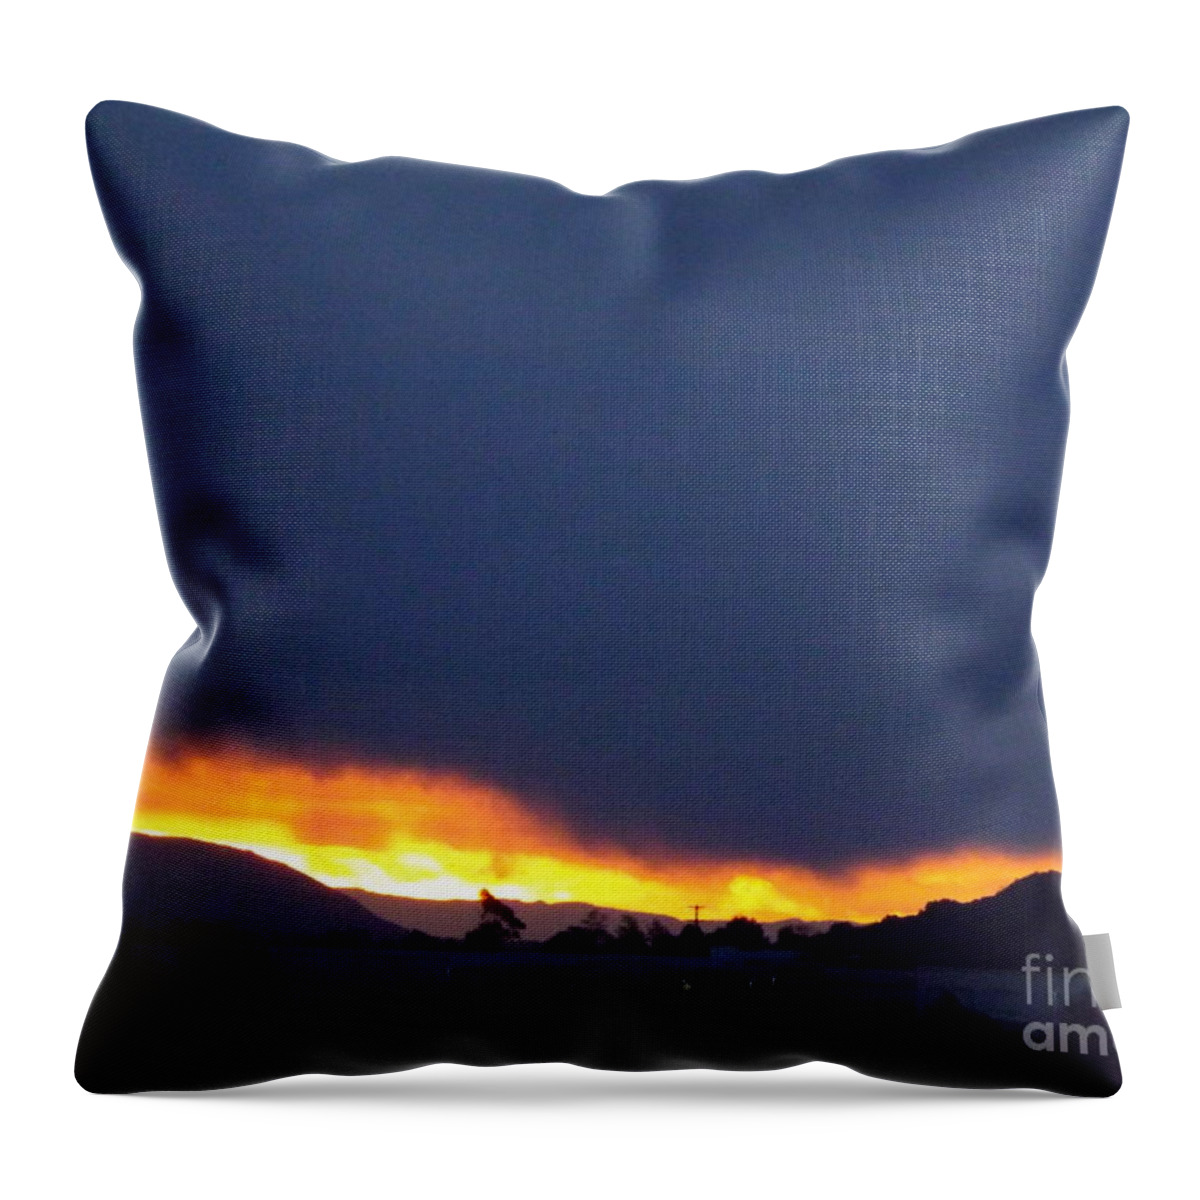 Sunrise Throw Pillow featuring the photograph Flaming Sunrise II by Jussta Jussta